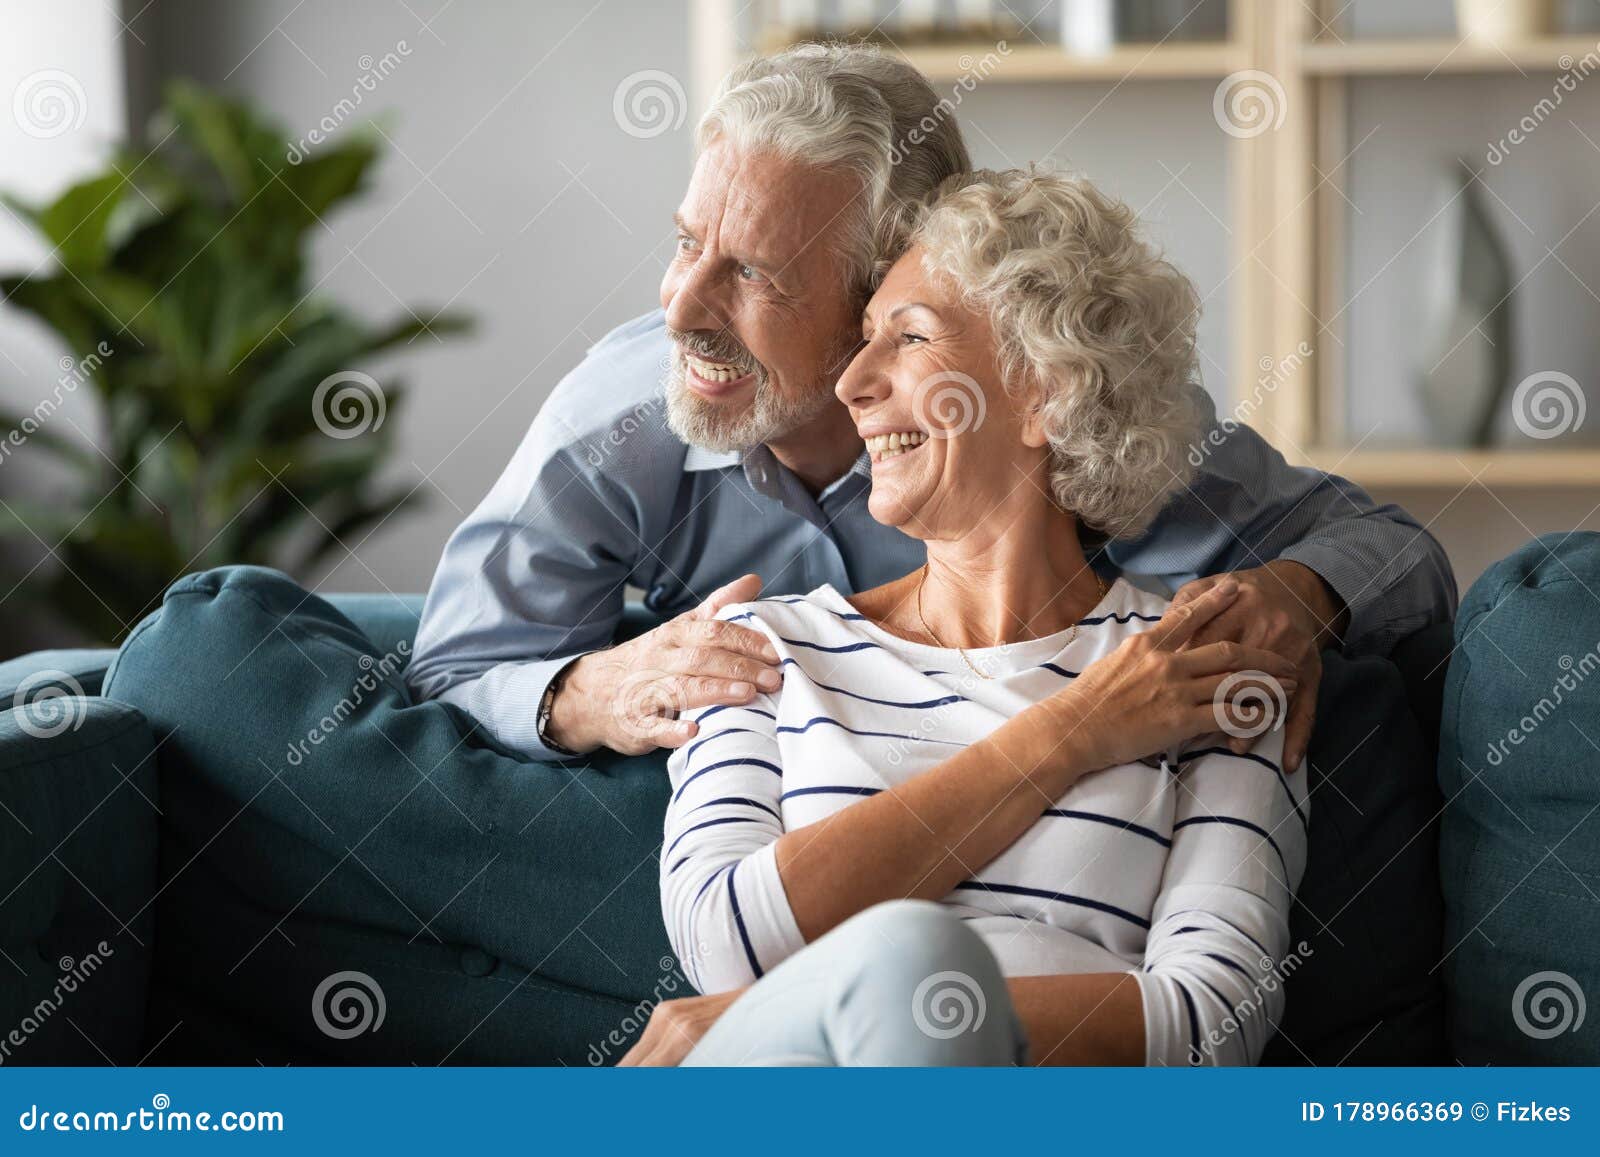 smiling older couple dreaming together, looking out window